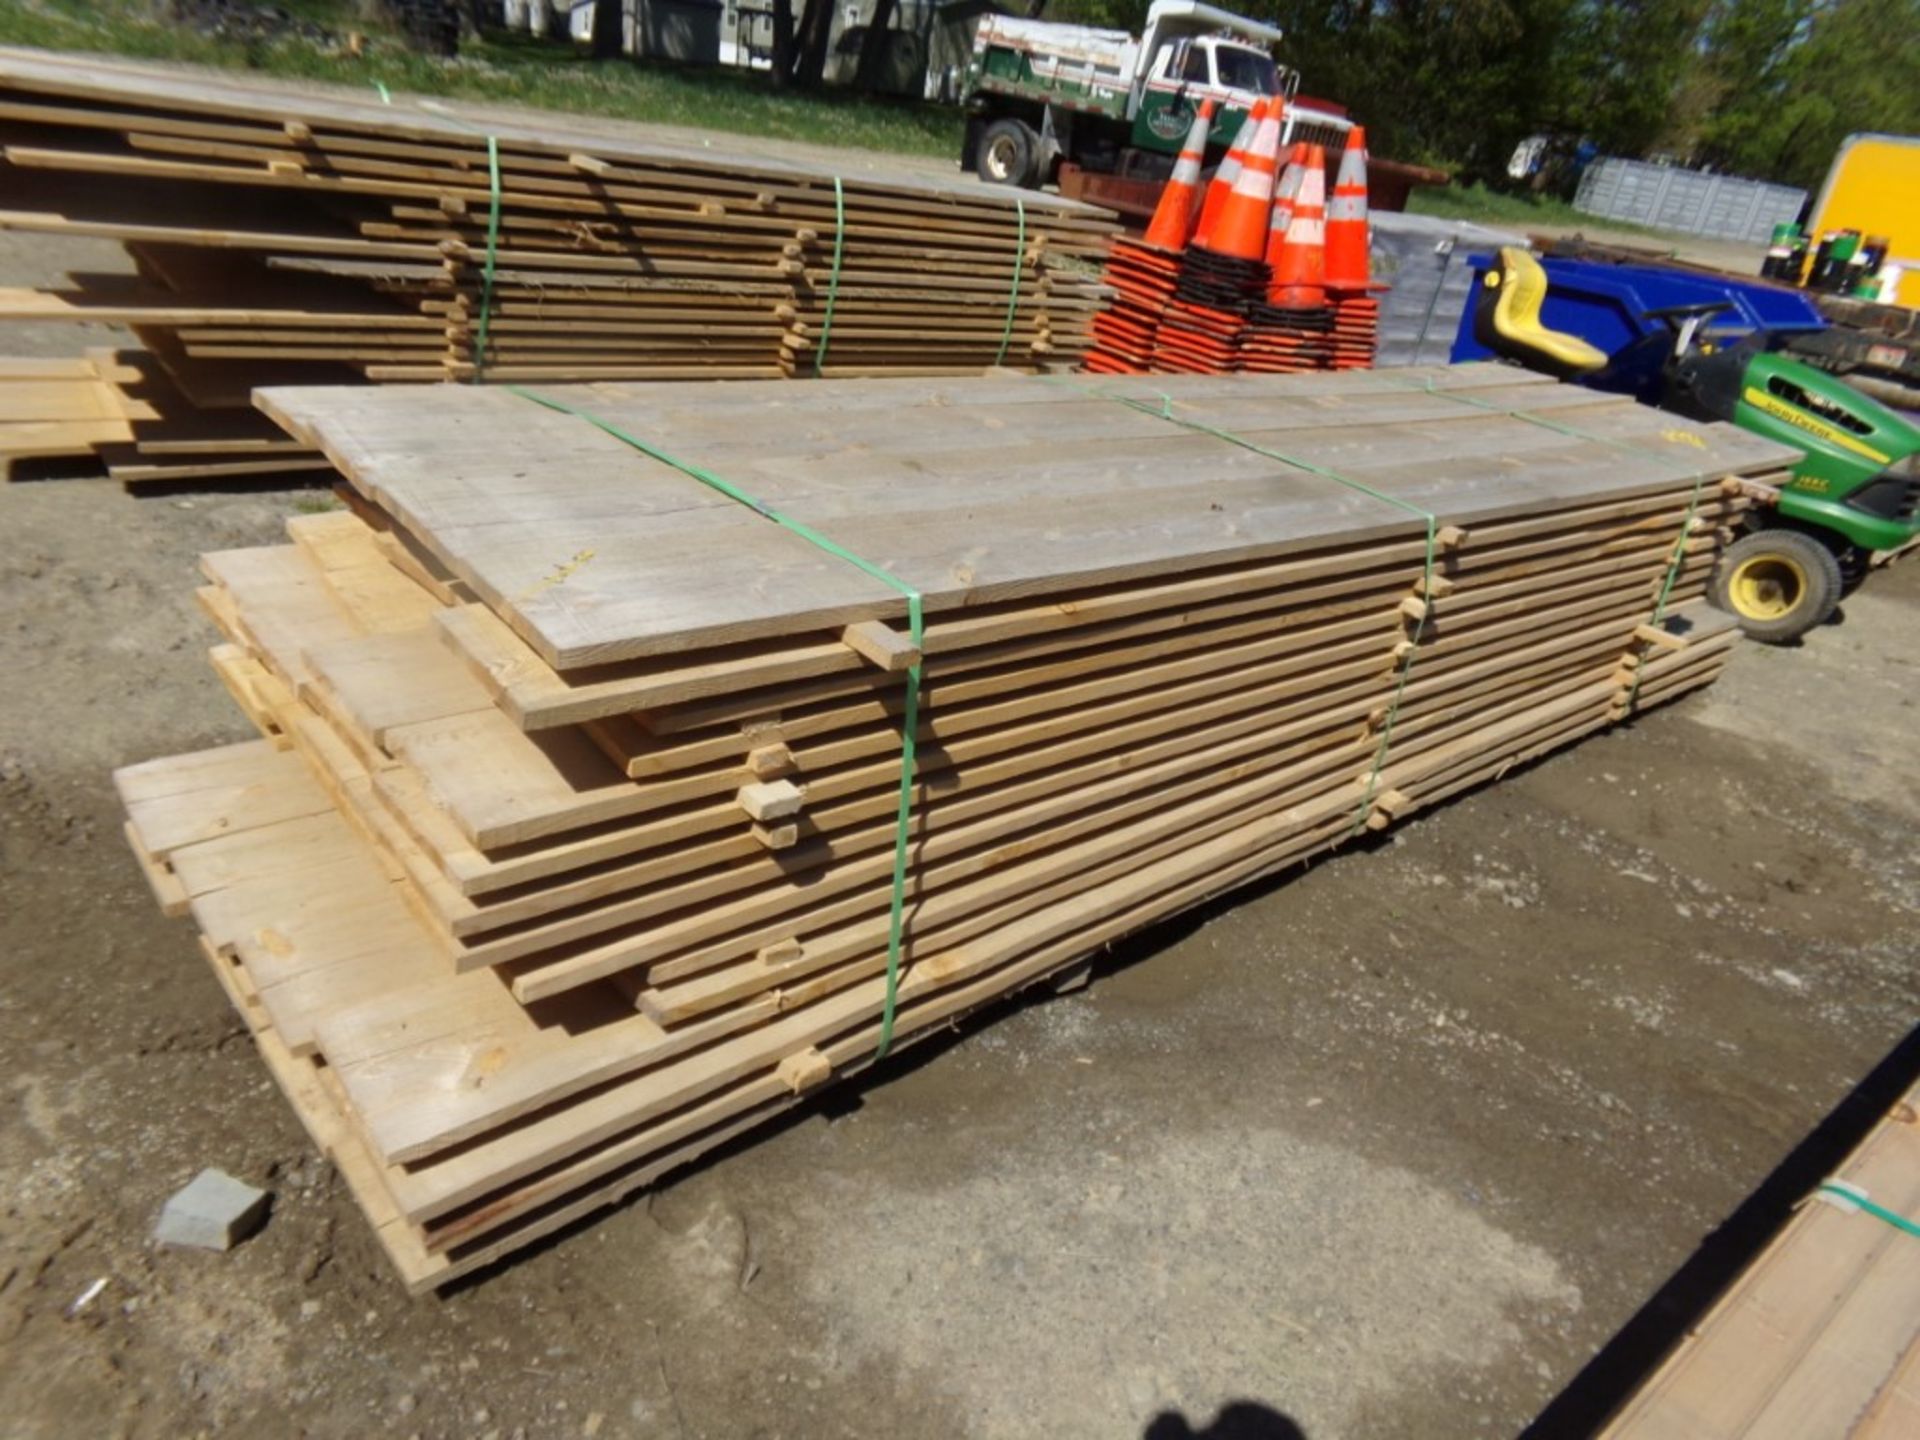 Group of 600 Board FT. of 1 x 10 Rough Cut Lumber, Sold by the Board Foot (600 x Bid Price)